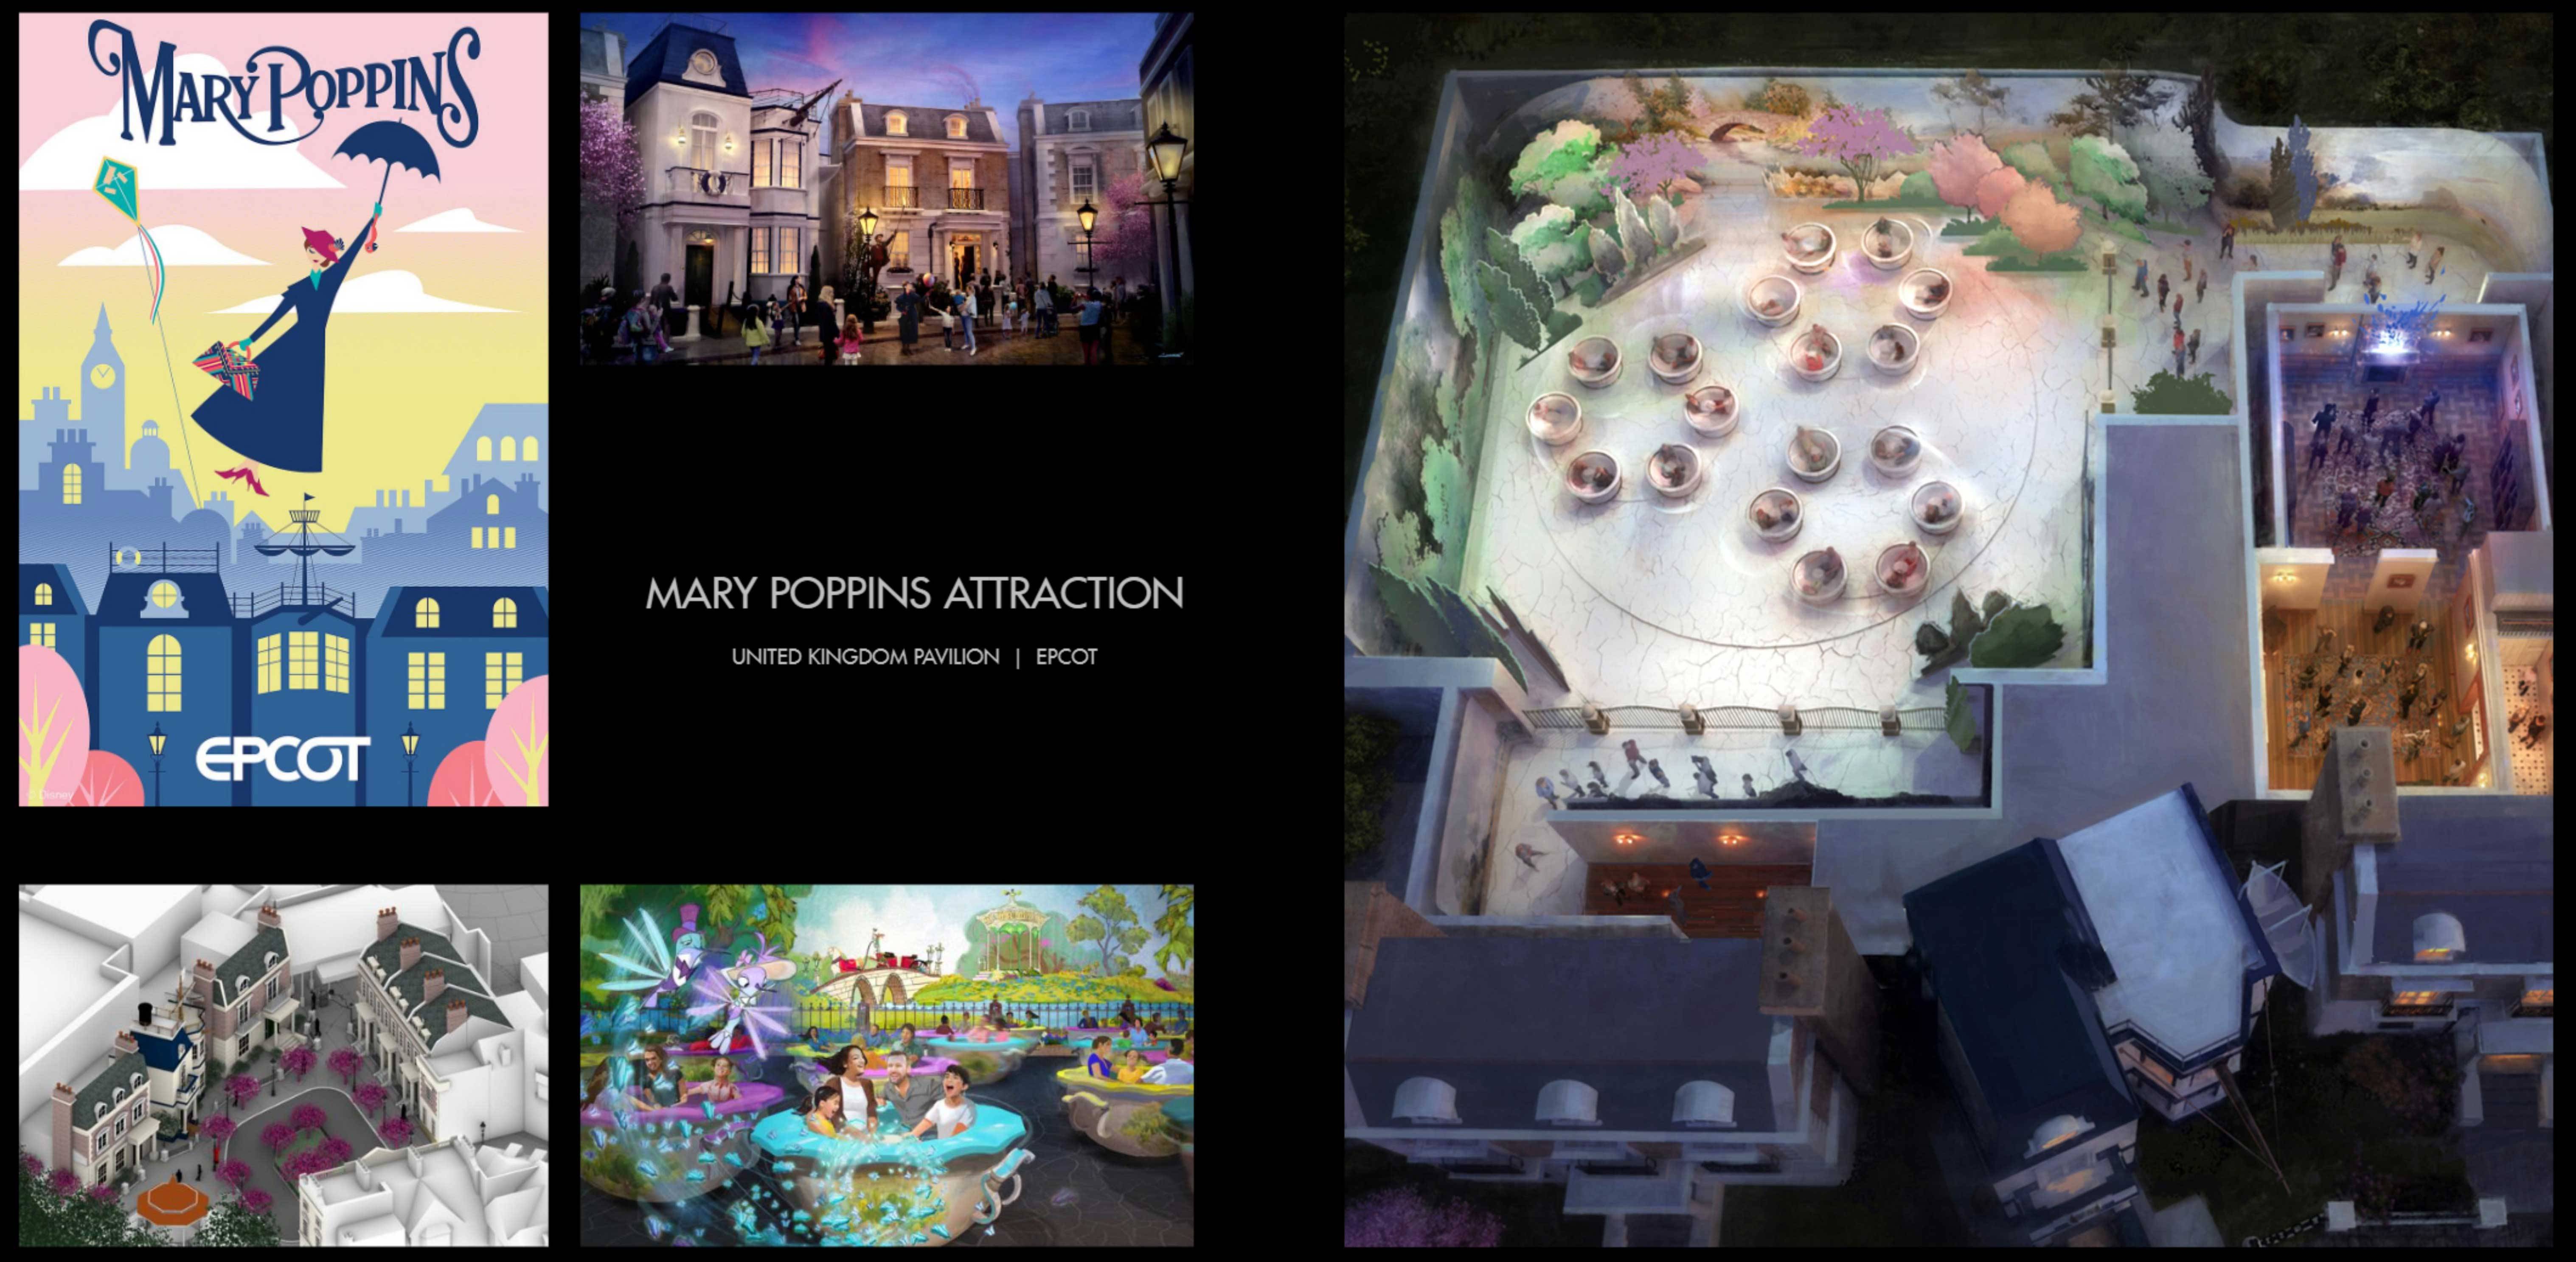 Previously unreleased concept art shows more of the delayed Mary Poppins ride planned for EPCOT at Walt Disney World